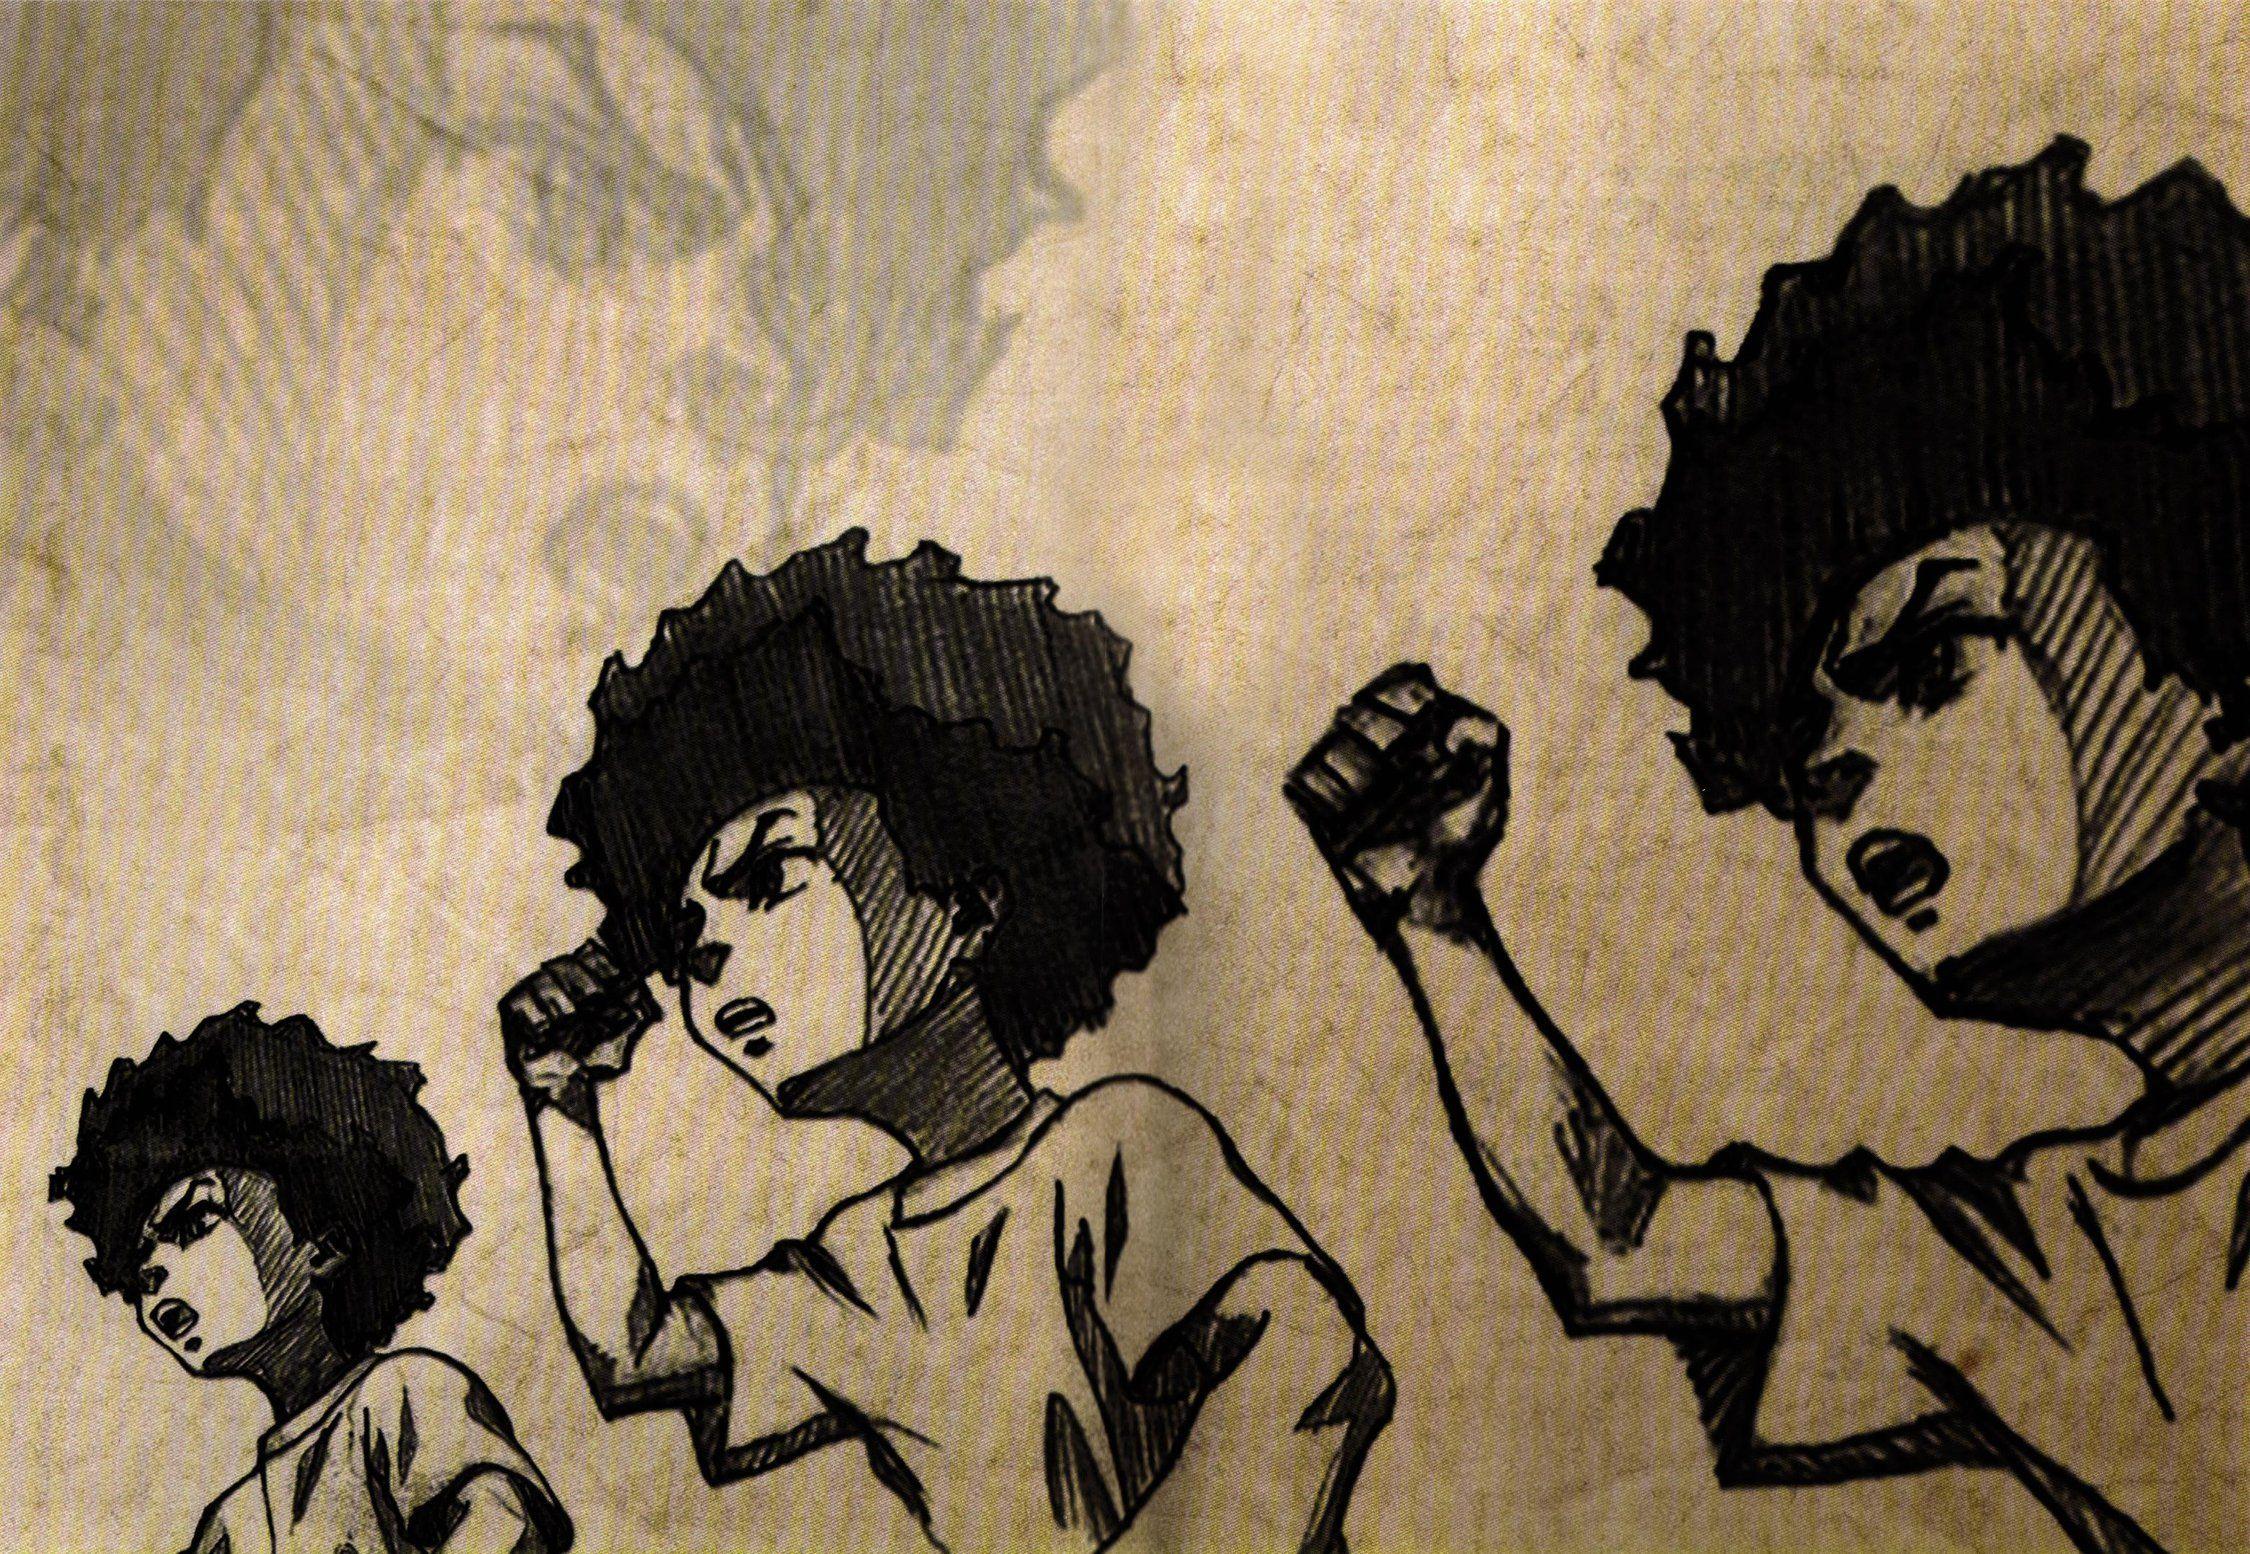 The Boondocks Wallpaper 4K Ultra hd wallpapers 4k 5k and 8k backgrounds ...